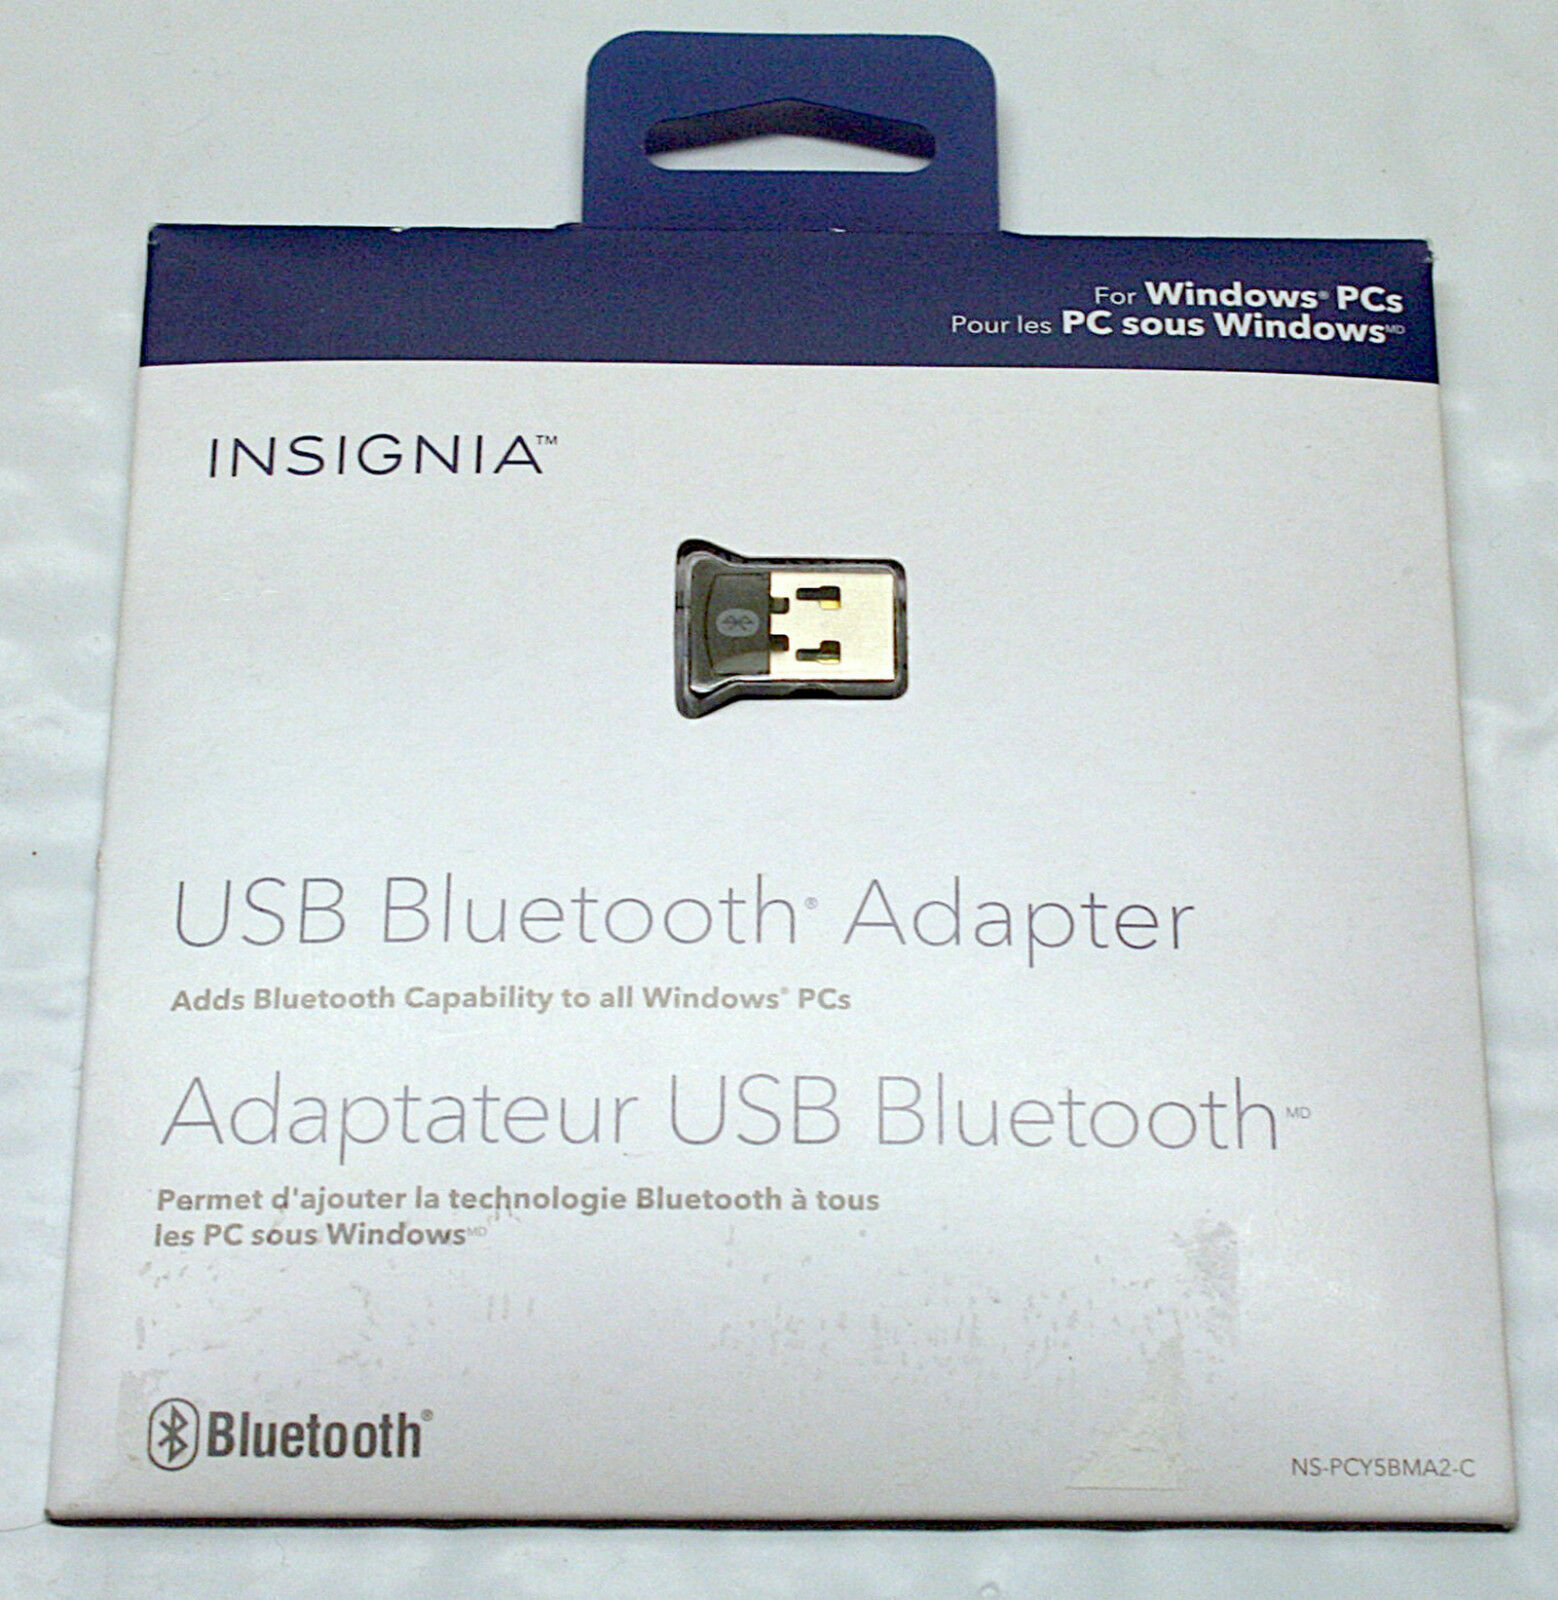 Lot of 10x New INSIGNIA BLUETOOTH 4.0 USB ADAPTER - NS-PCY5BMA2-C Open Box